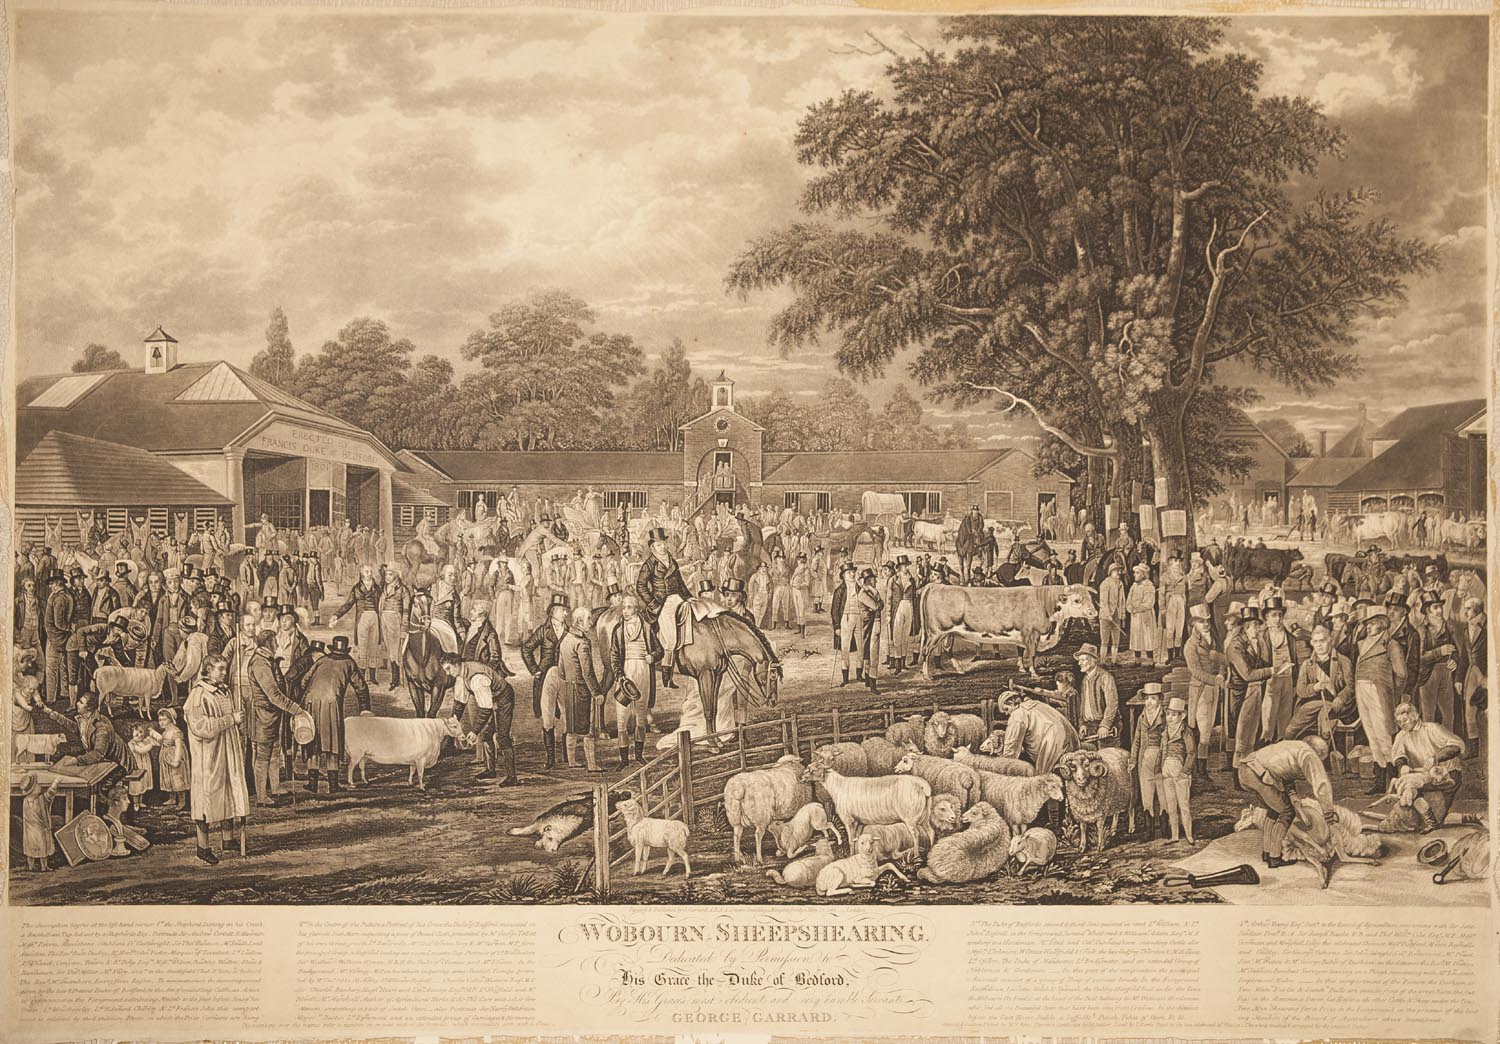 A black on cream print fromm an engraving, showing a busy scene of farming figures and animals in an early-19th-century agricultural context. 